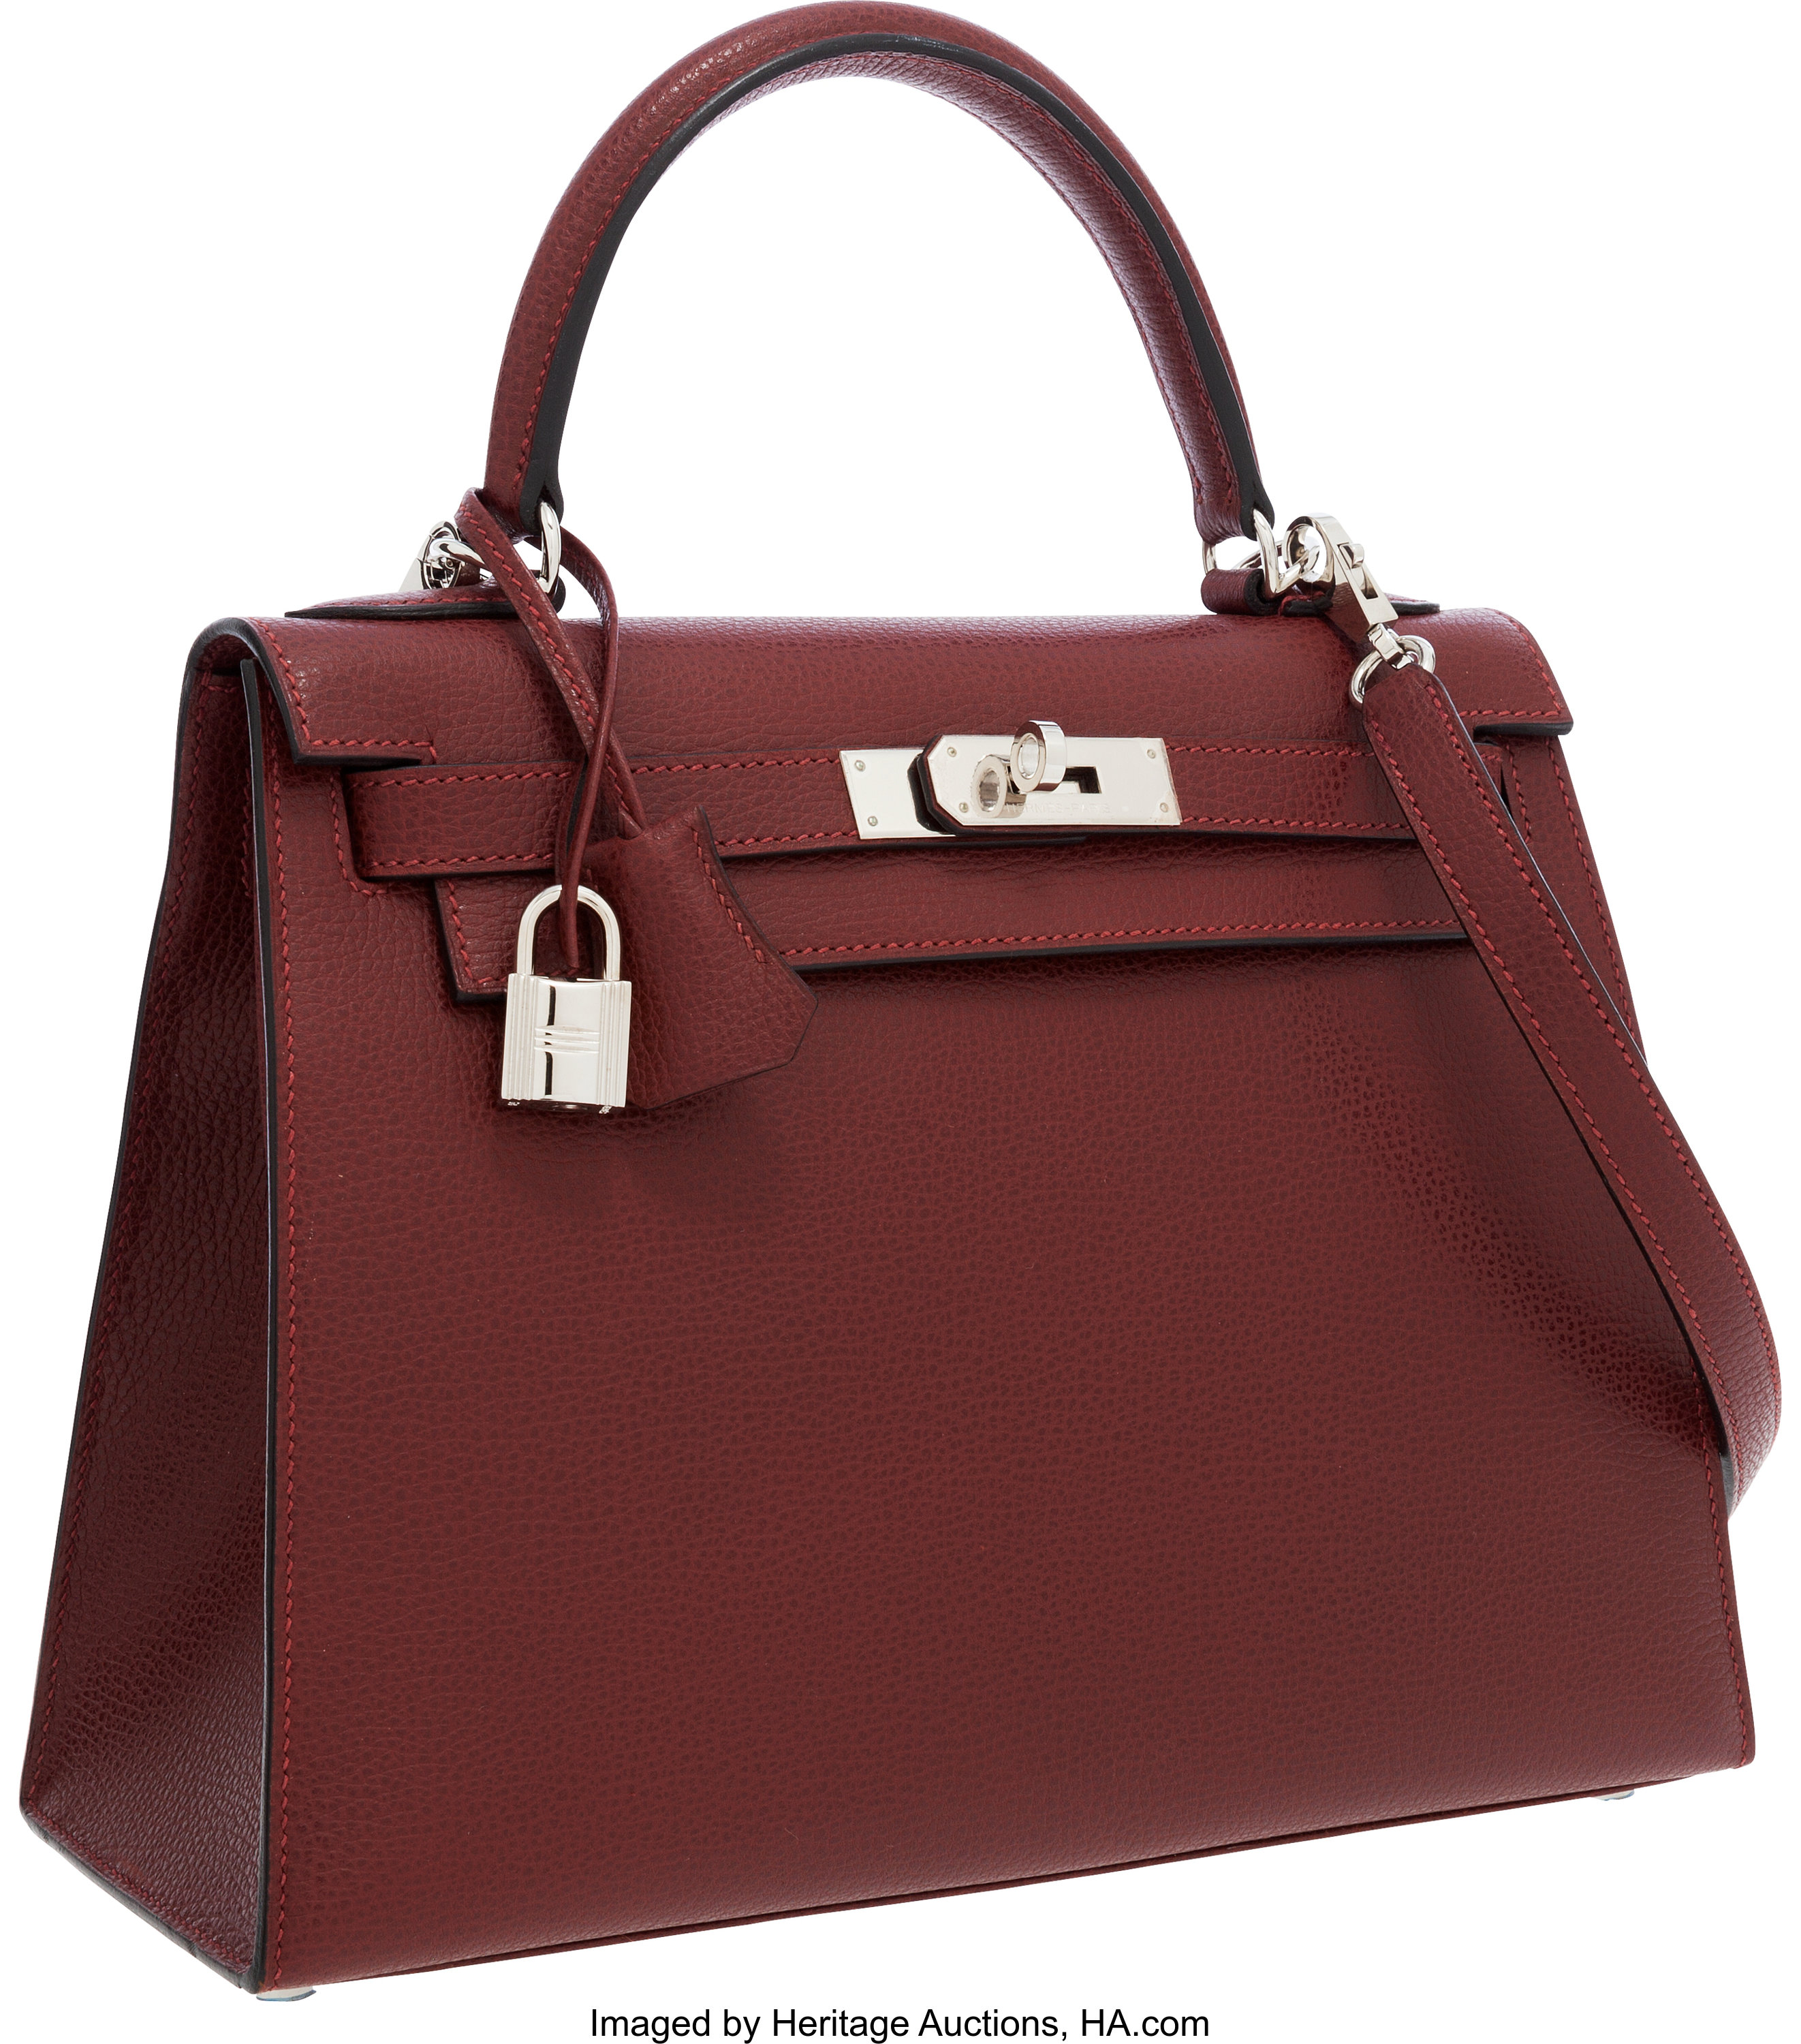 Hermes 28cm Rouge H Vache Liegee Sellier Kelly Bag with Palladium